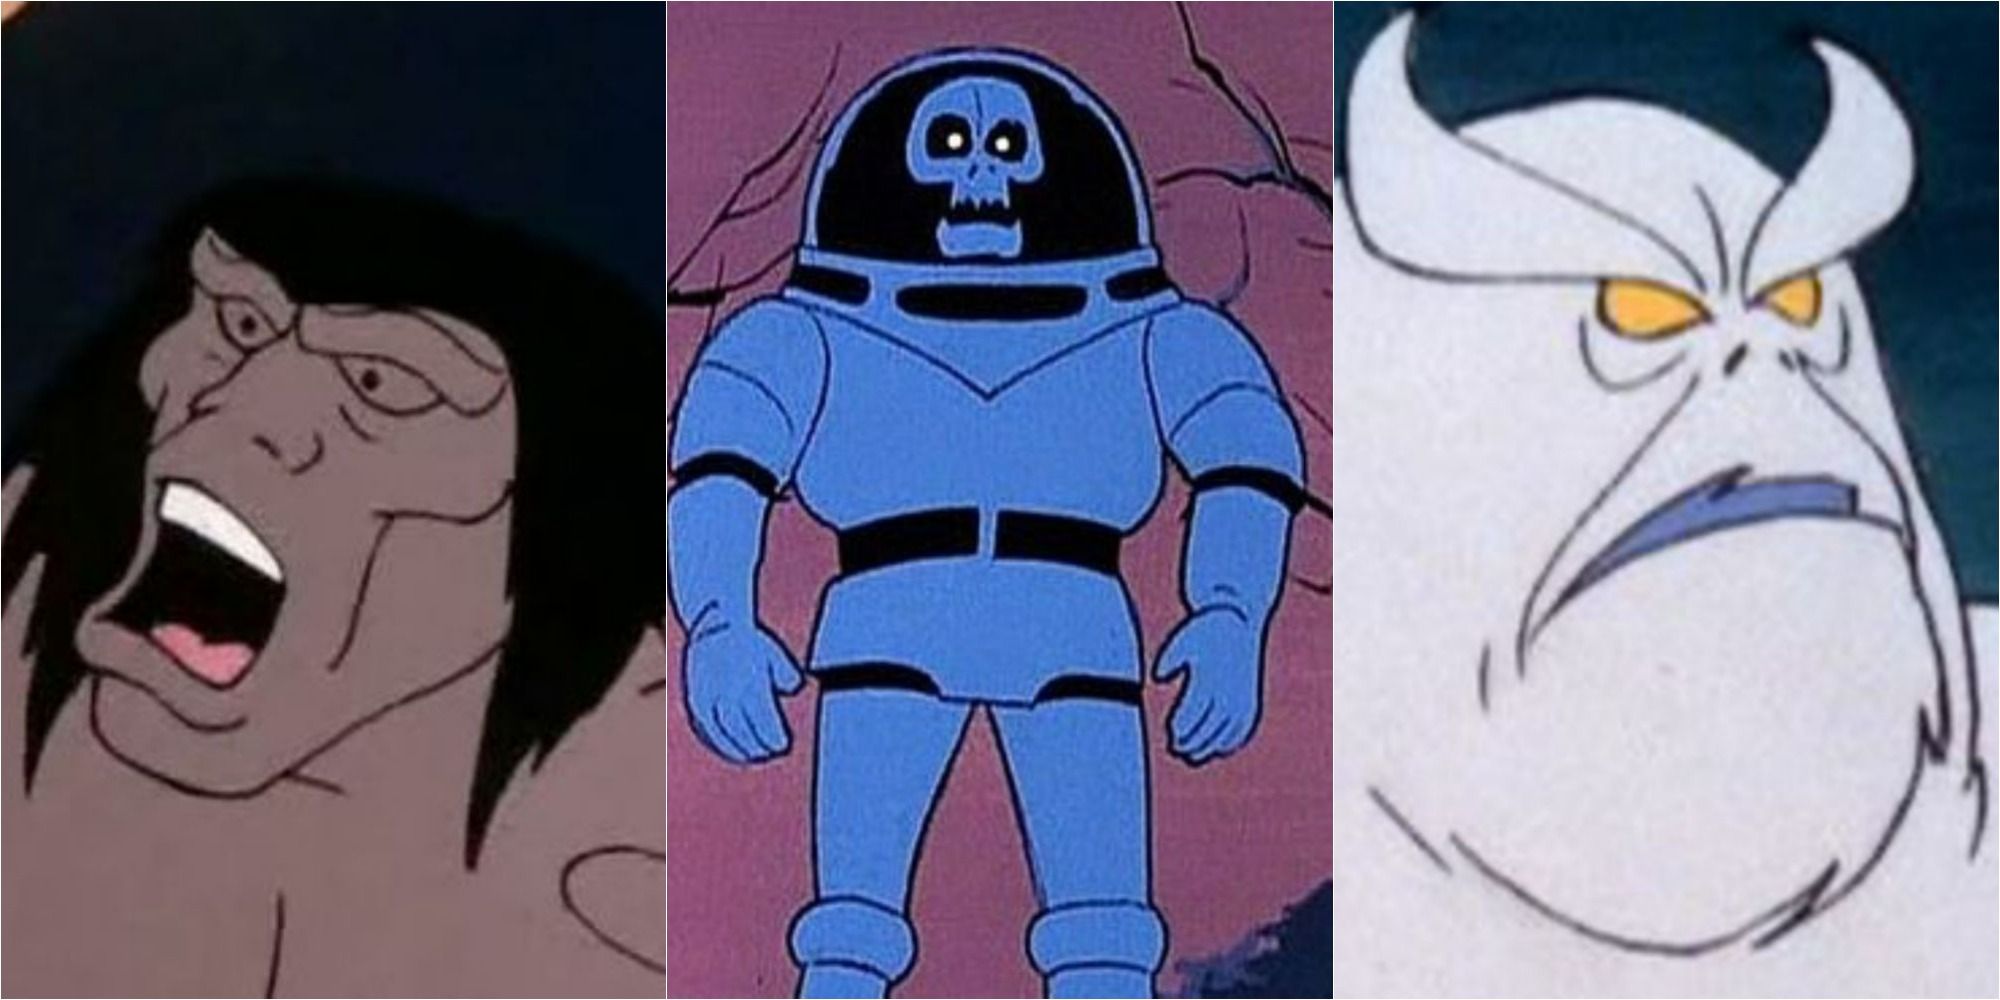 Most Iconic Villains From Scooby-Doo, Where Are You!